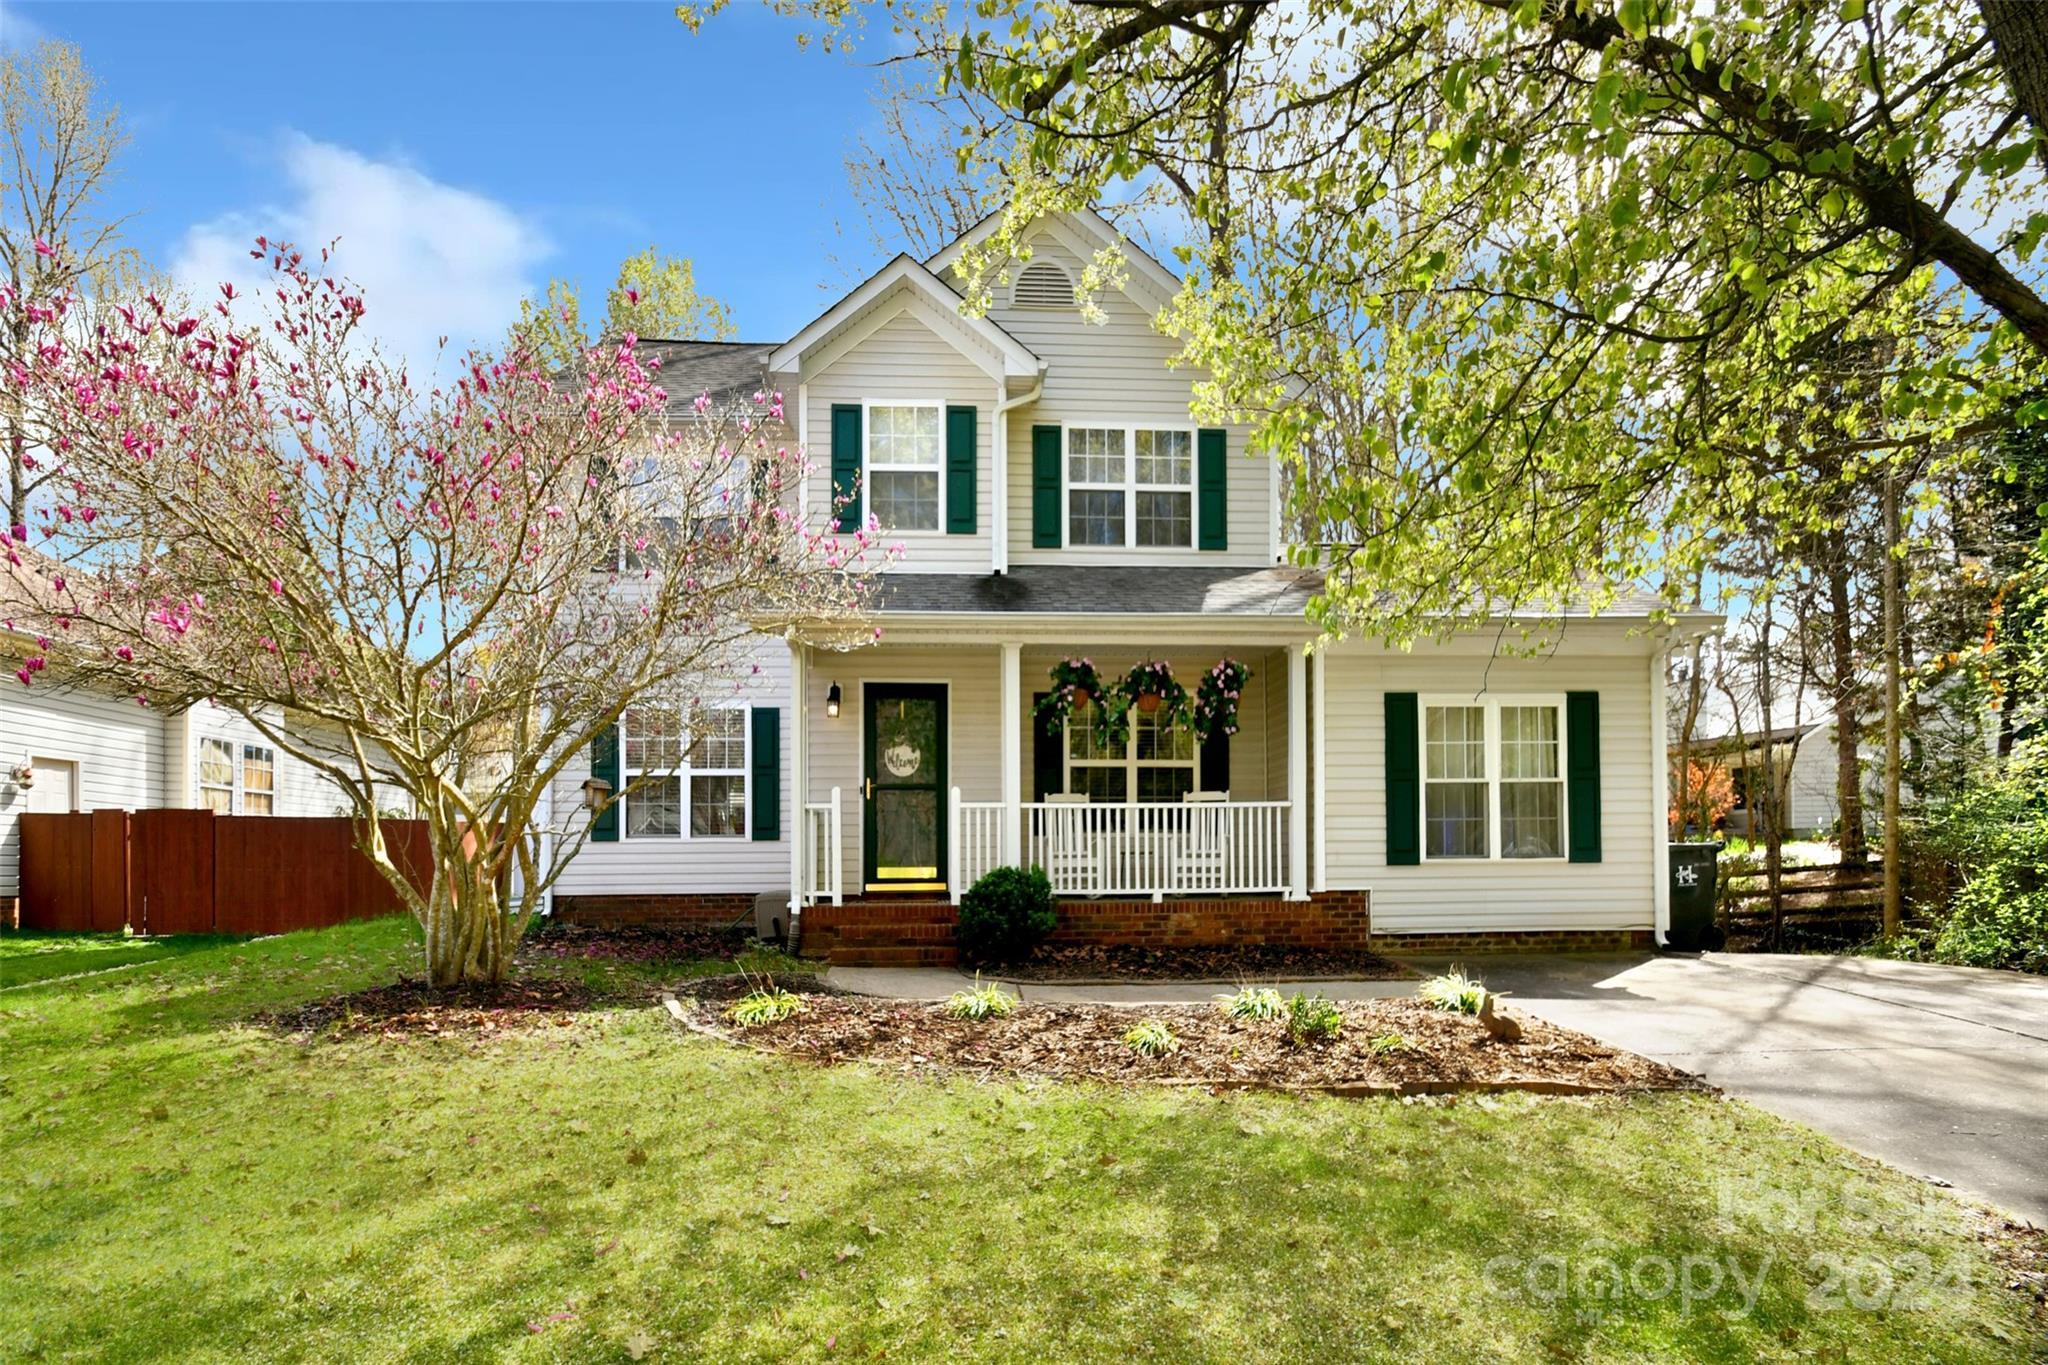 Photo one of 16421 Amber Field Dr Huntersville NC 28078 | MLS 4120616